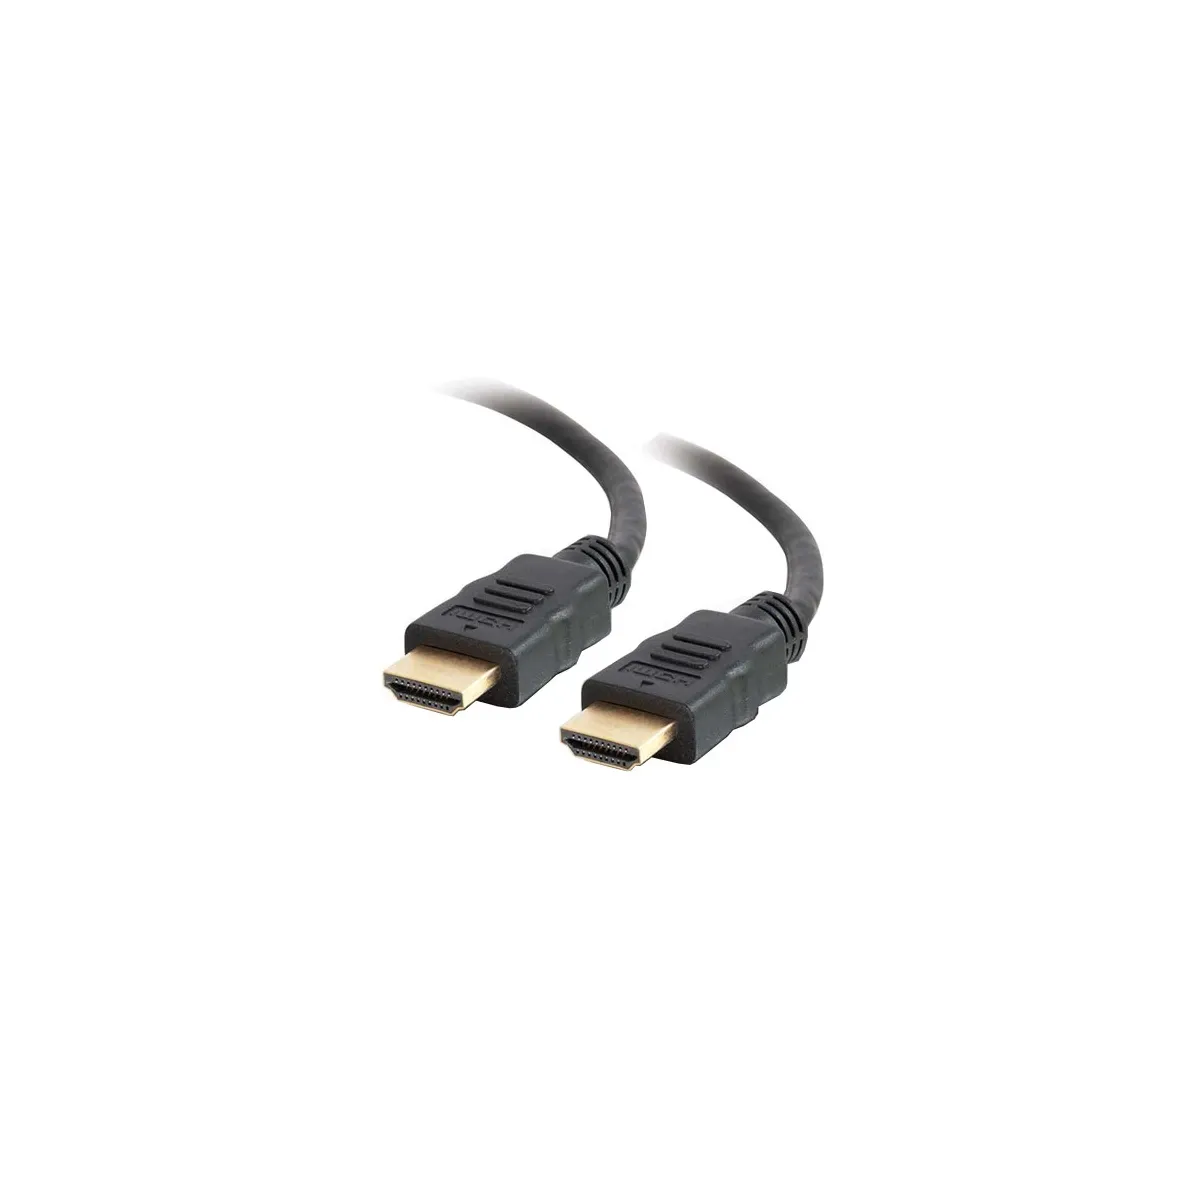 HDMI to HDMI Cable - 1M